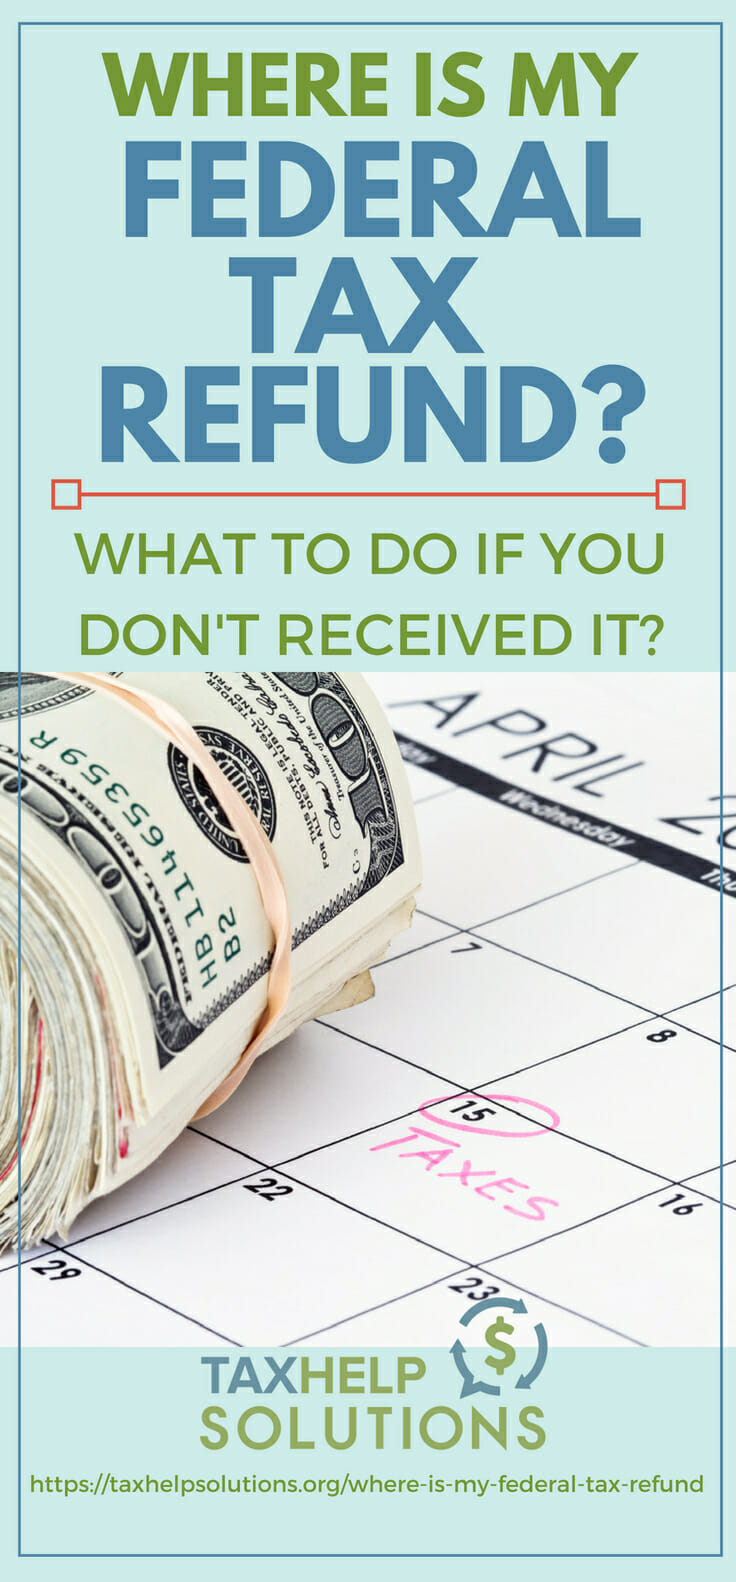 Where Is My Federal Tax Refund? What To Do If You Don't Receive It